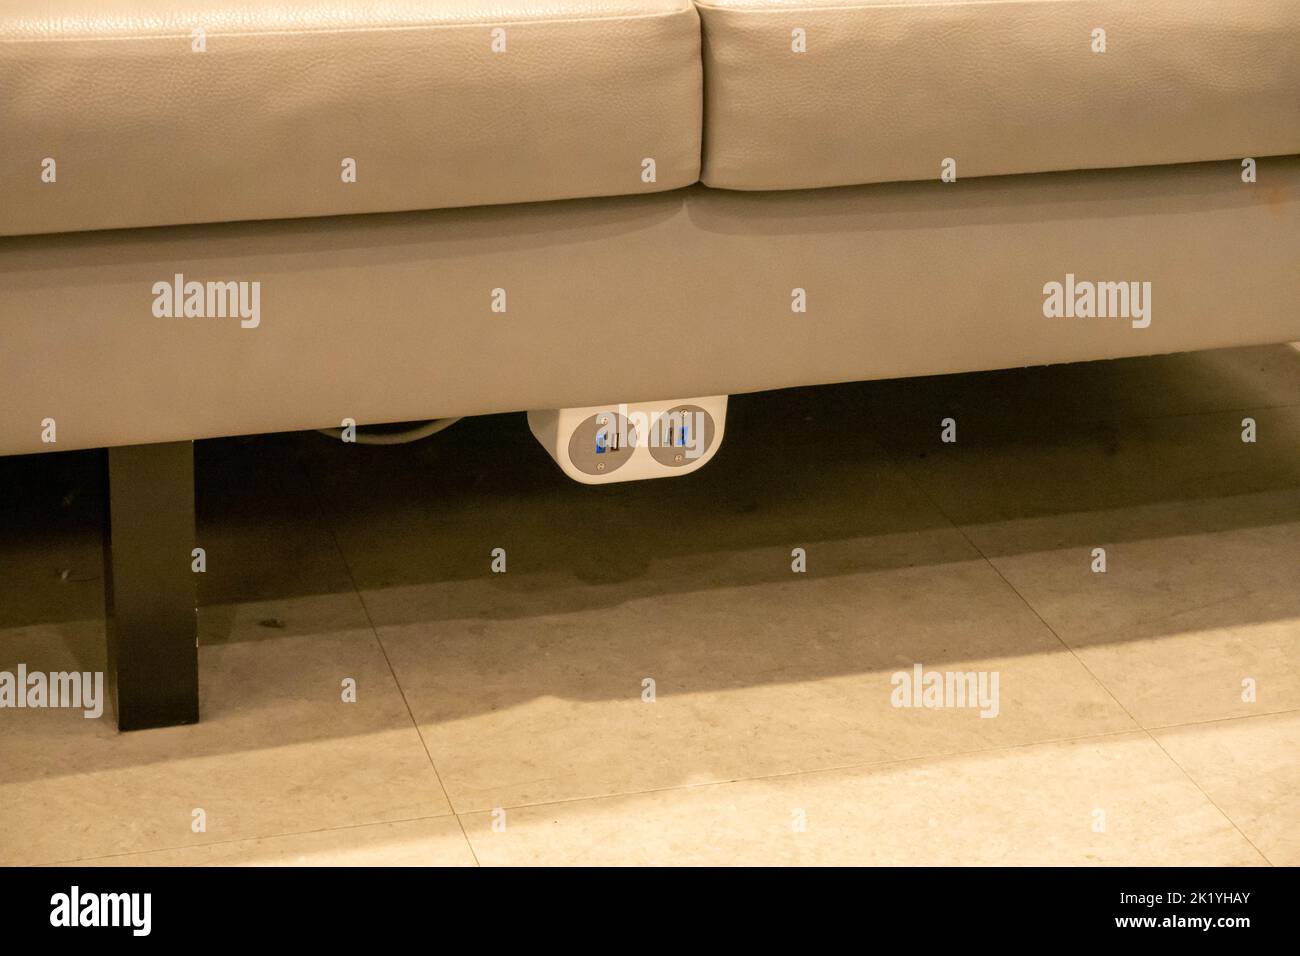 A free phone charging sockets on a sofa in a clothes shop in Norwich England Stock Photo